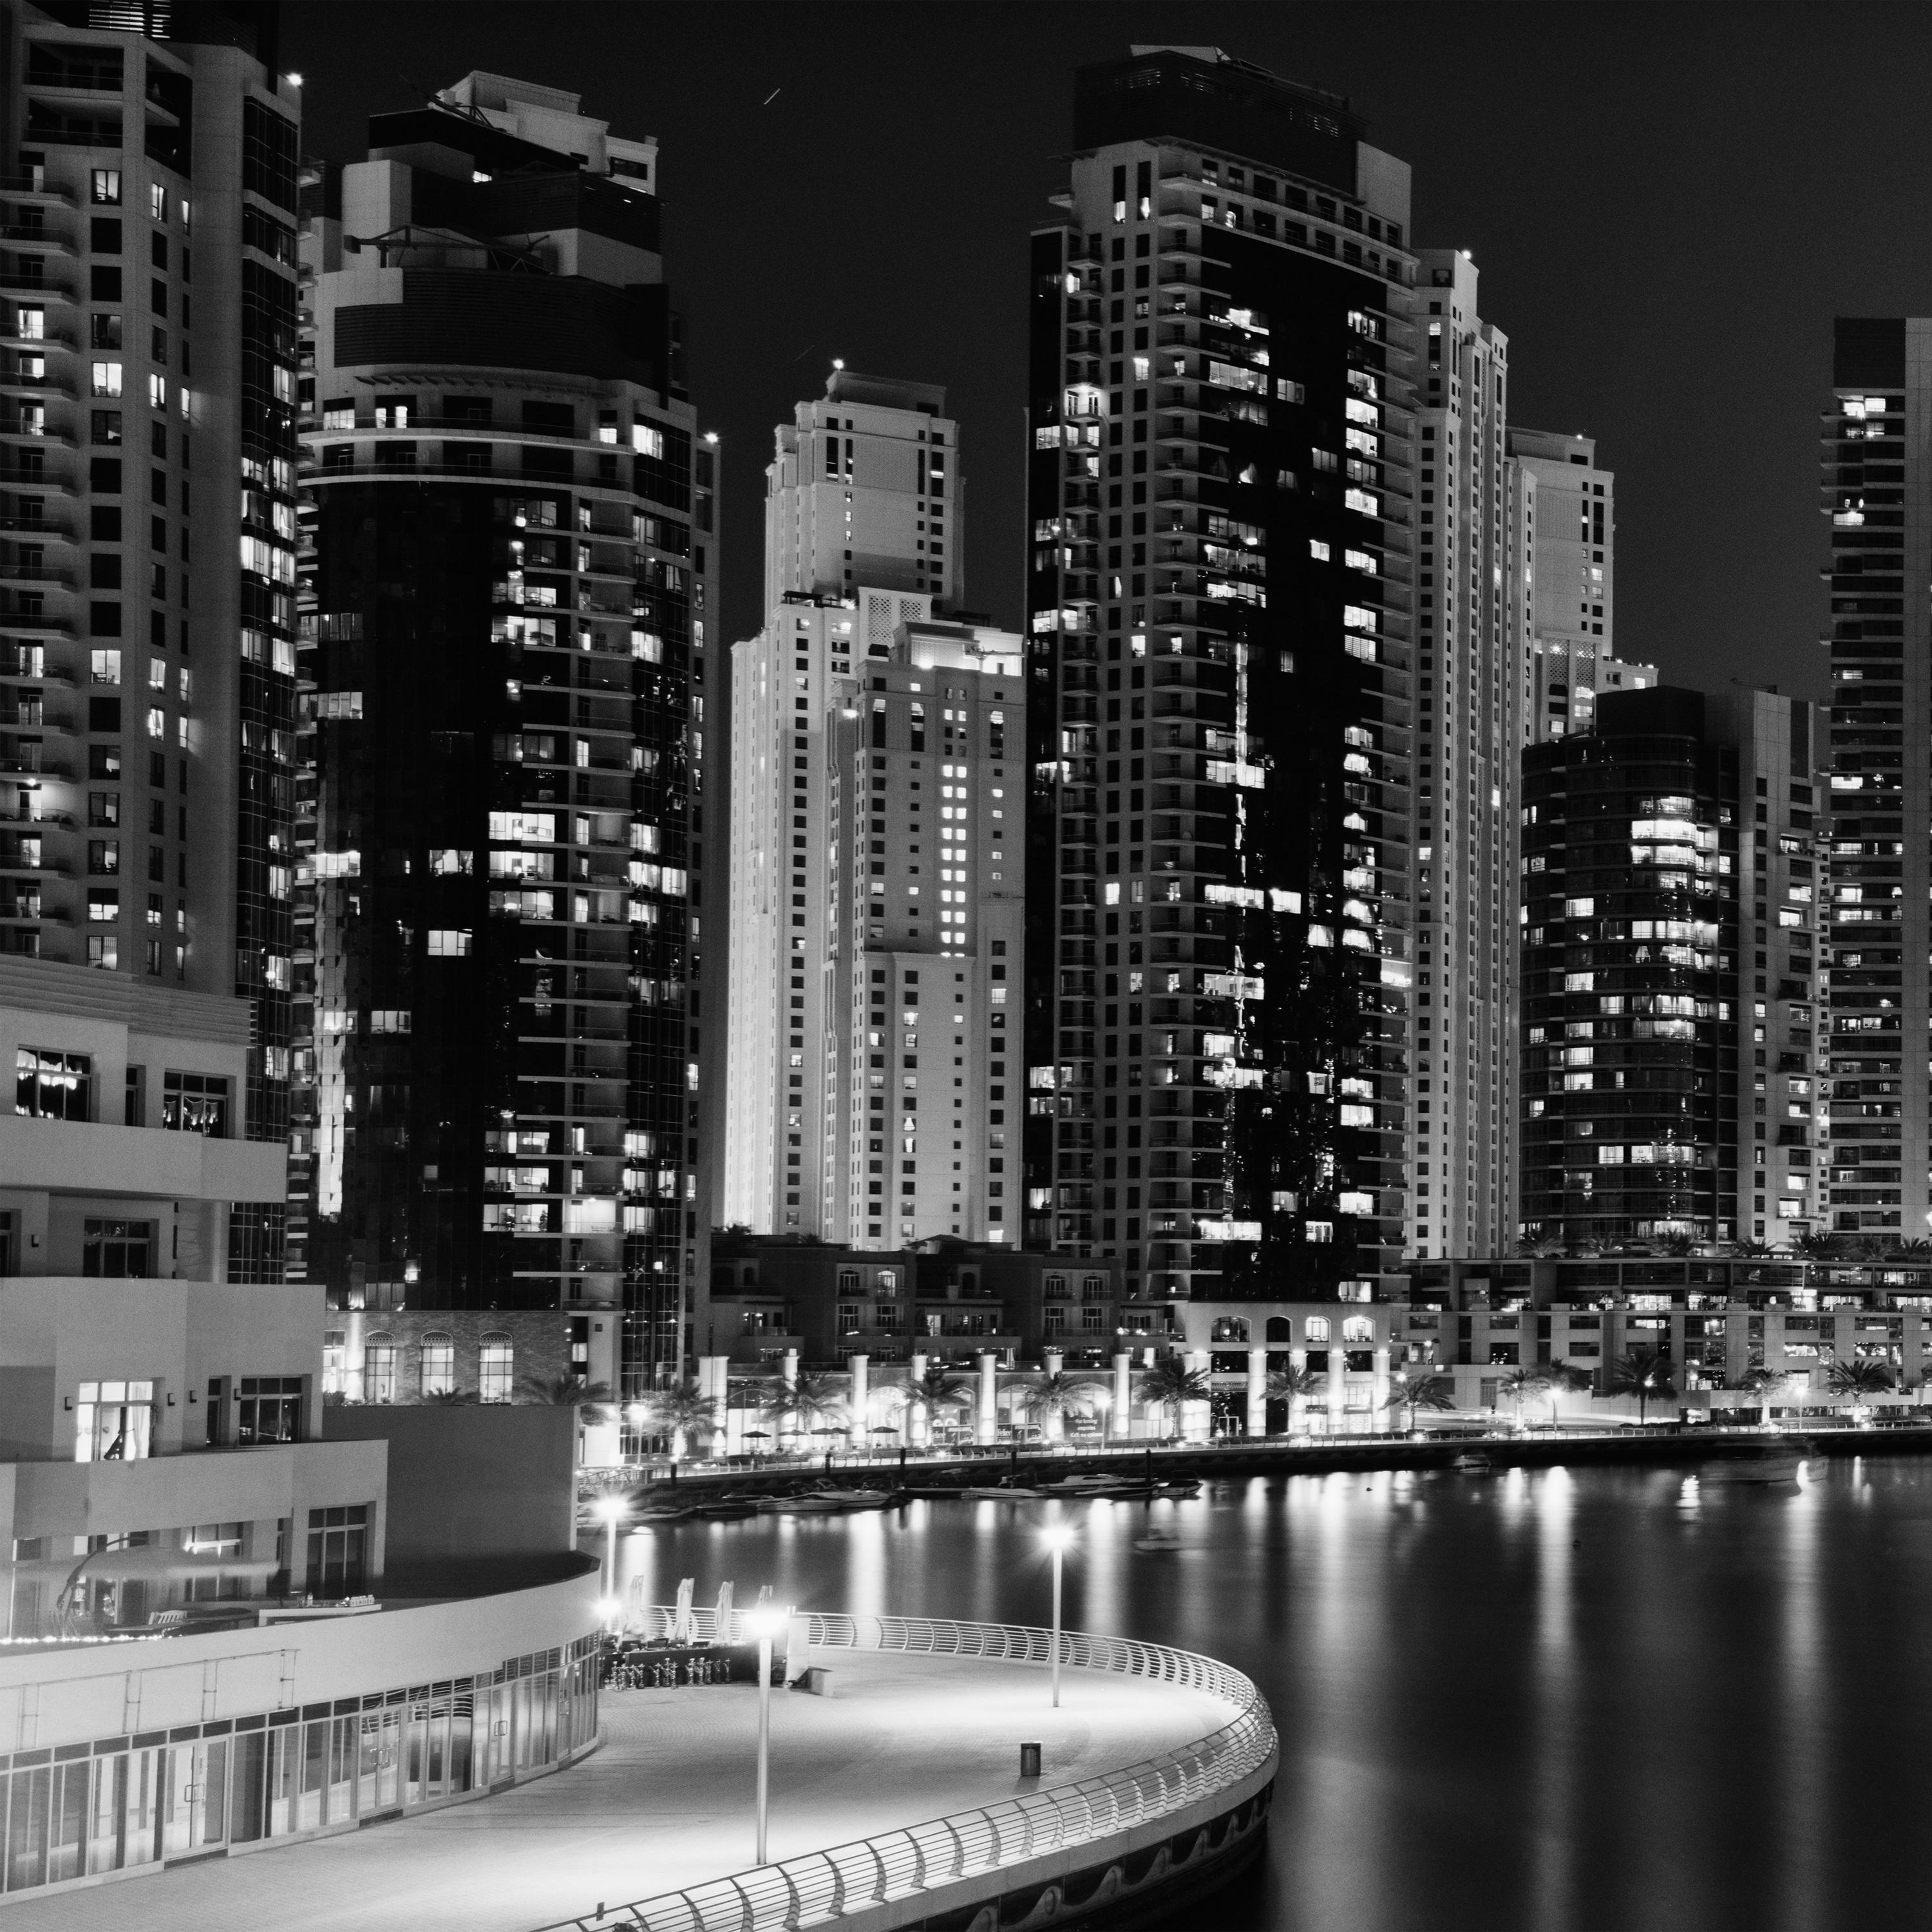 Black and white fine art long exposure waterscape - cityscape - panorama photography. Archival pigment ink print as part of a limited edition of 9. All Gerald Berghammer prints are made to order in limited editions on Hahnemuehle Photo Rag Baryta.